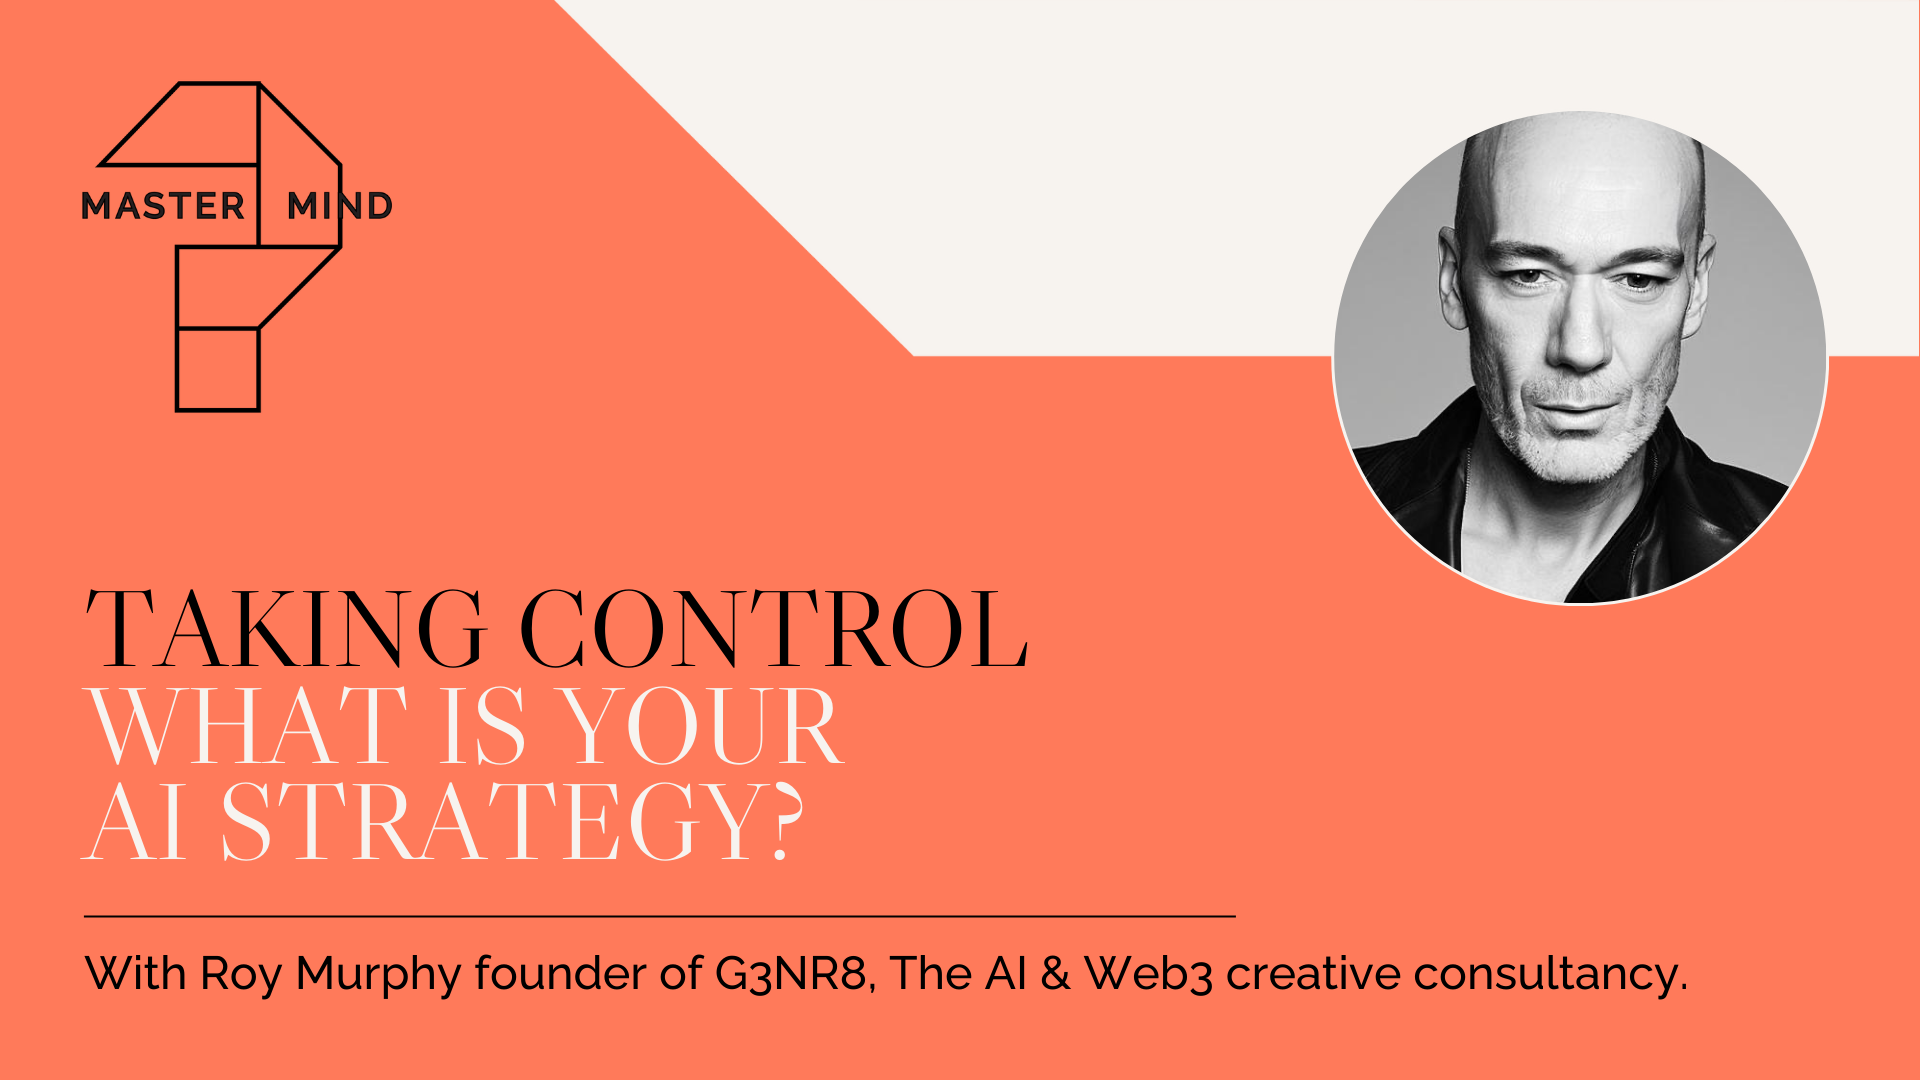 Taking Control - What is your AI Strategy? With Roy Murphy founder of G3NR8, The AI & Web3 creative consultancy